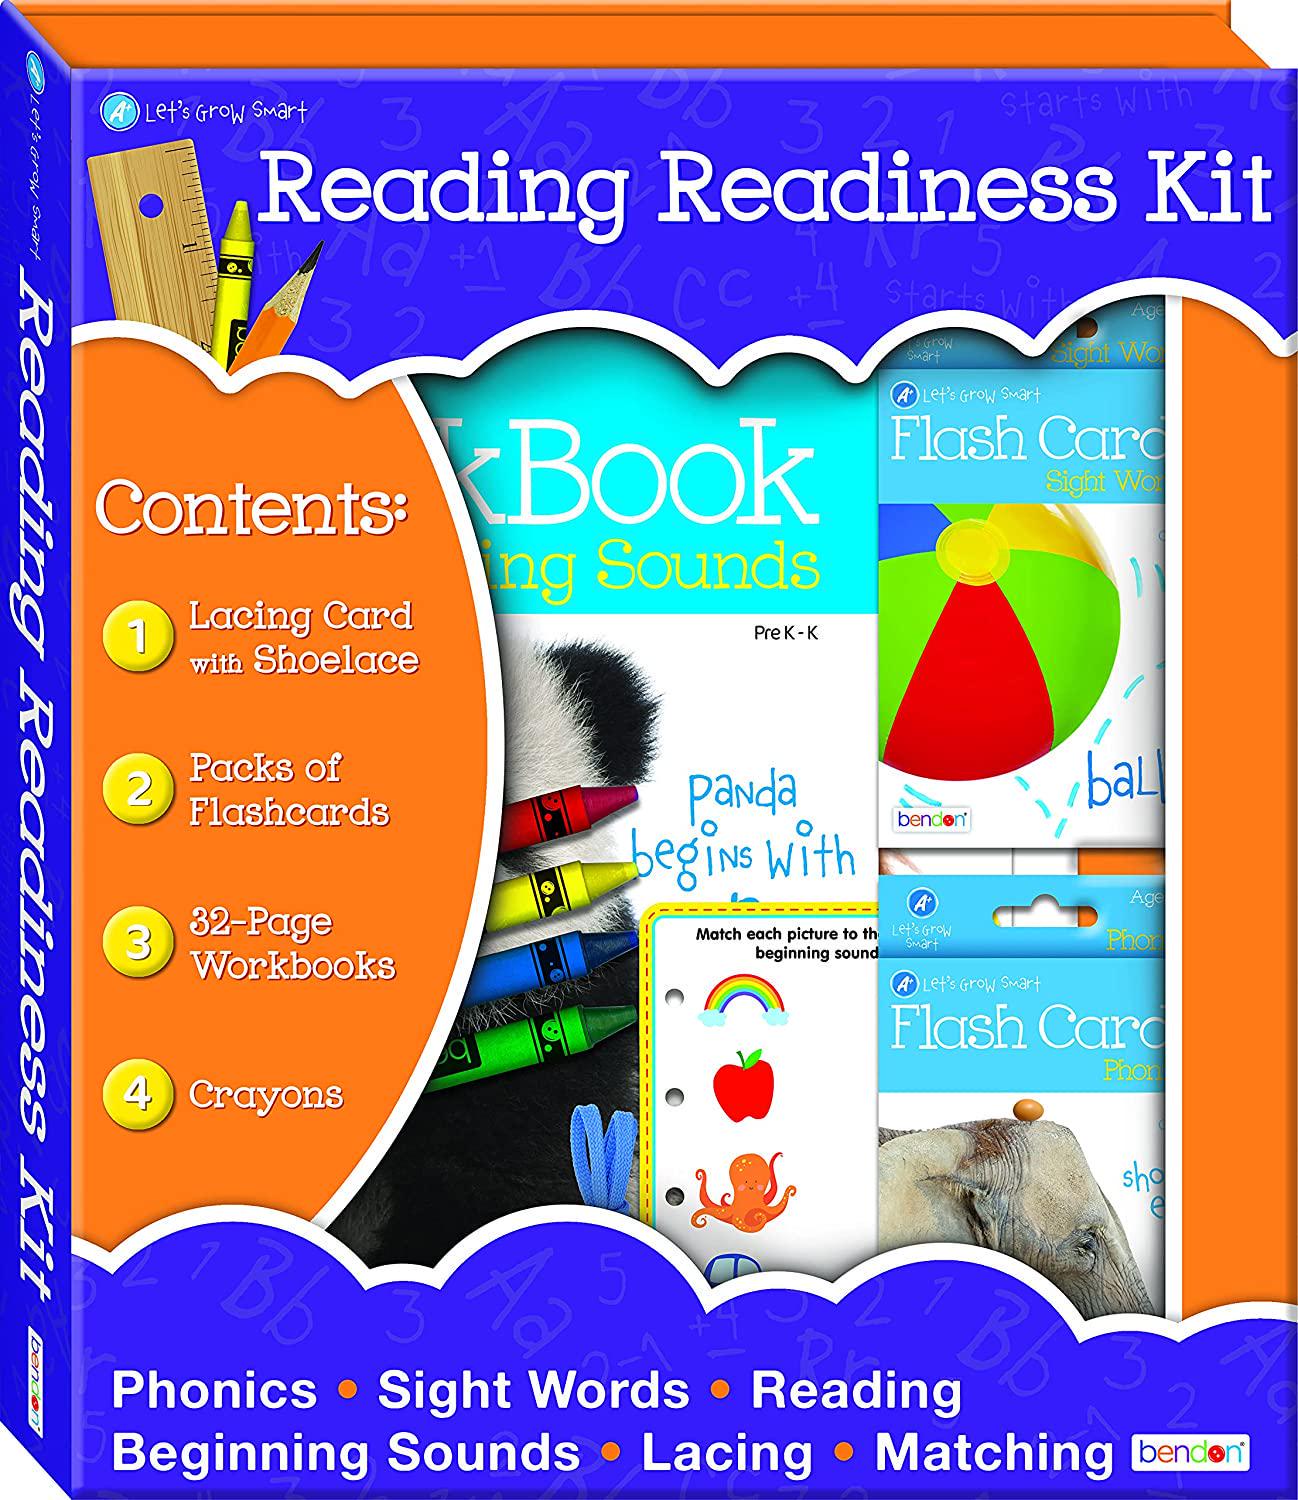 Bendon, Learn to Read, Reading Readiness Educational Box Set with 3 Early Learning Workbooks, Flash Cards, Crayons and More